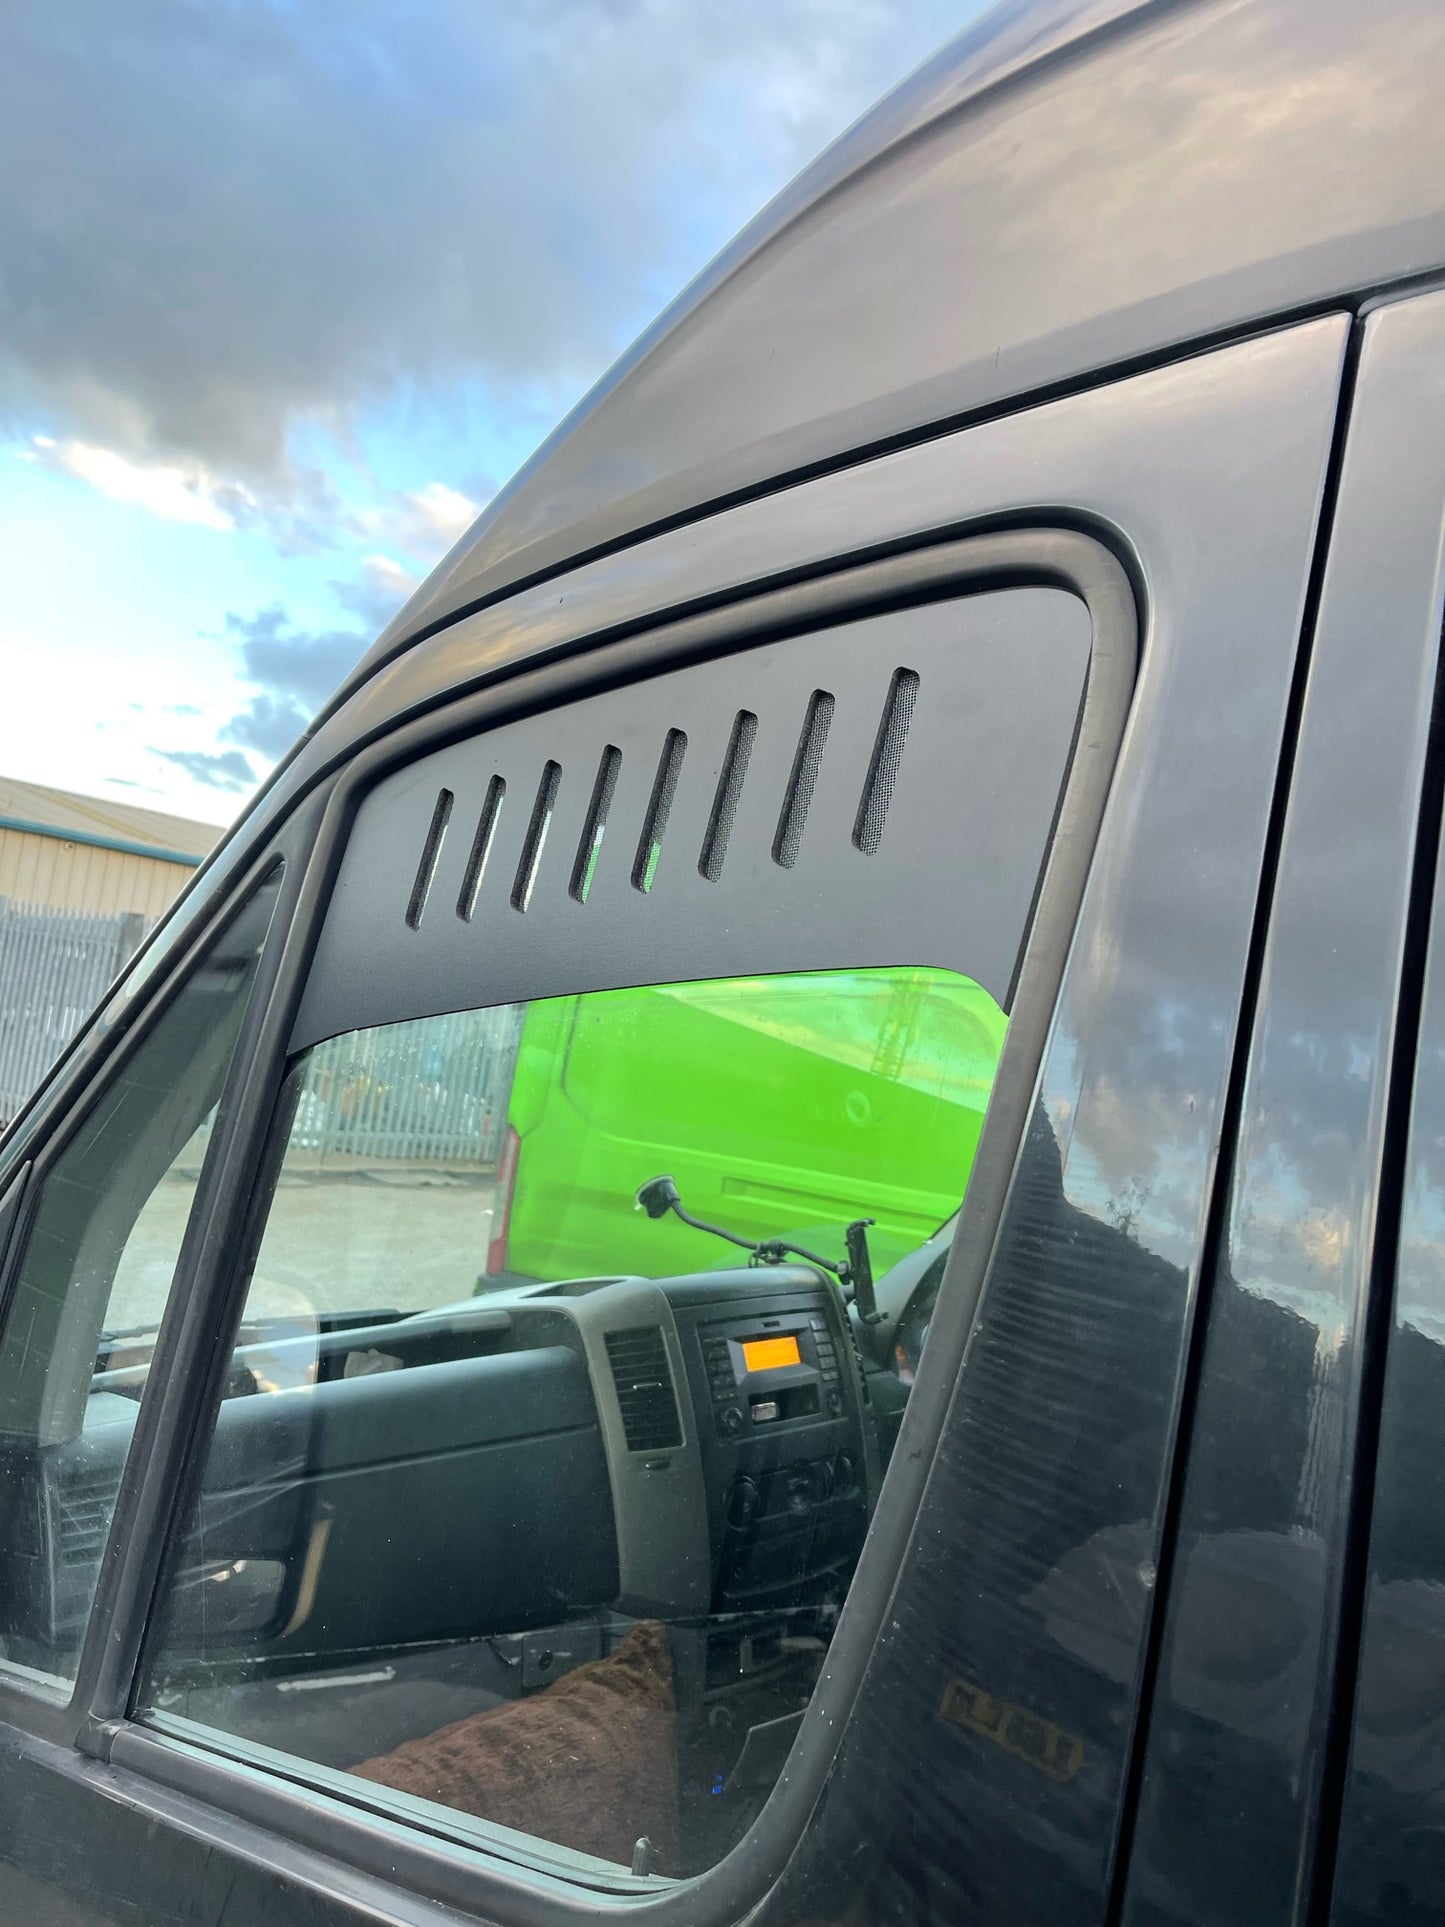 VW CRAFTER 2006 to 2016 WINDOW BUG VENTS